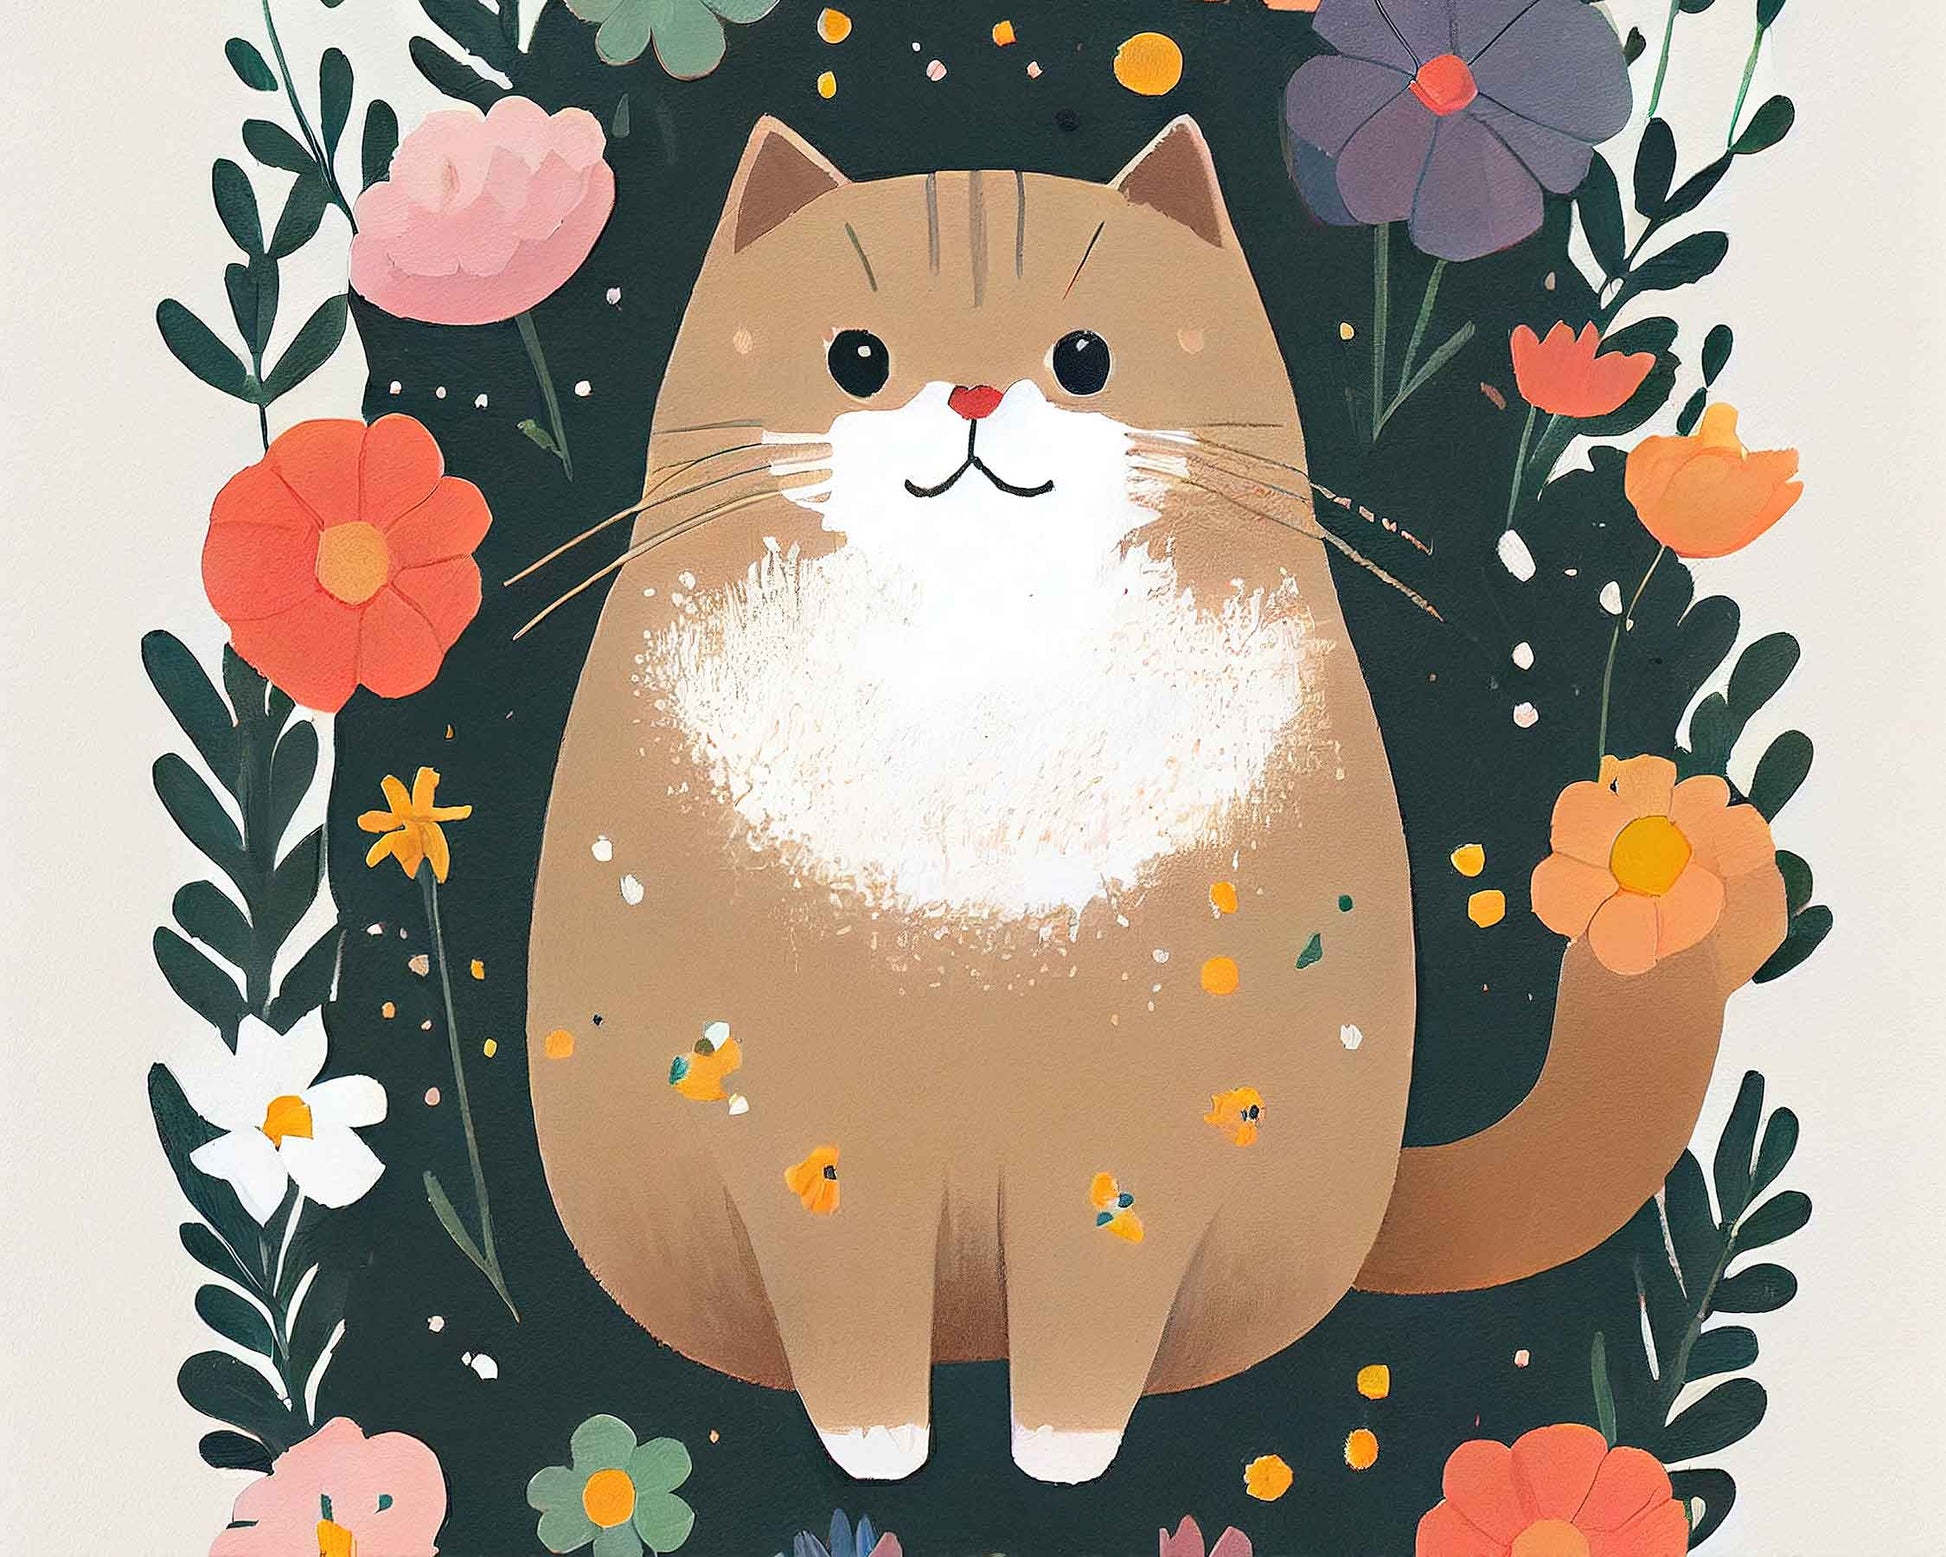 Framed Image of Cute Brown Beige Cat With Colourful Flowers Wall Art Poster Print